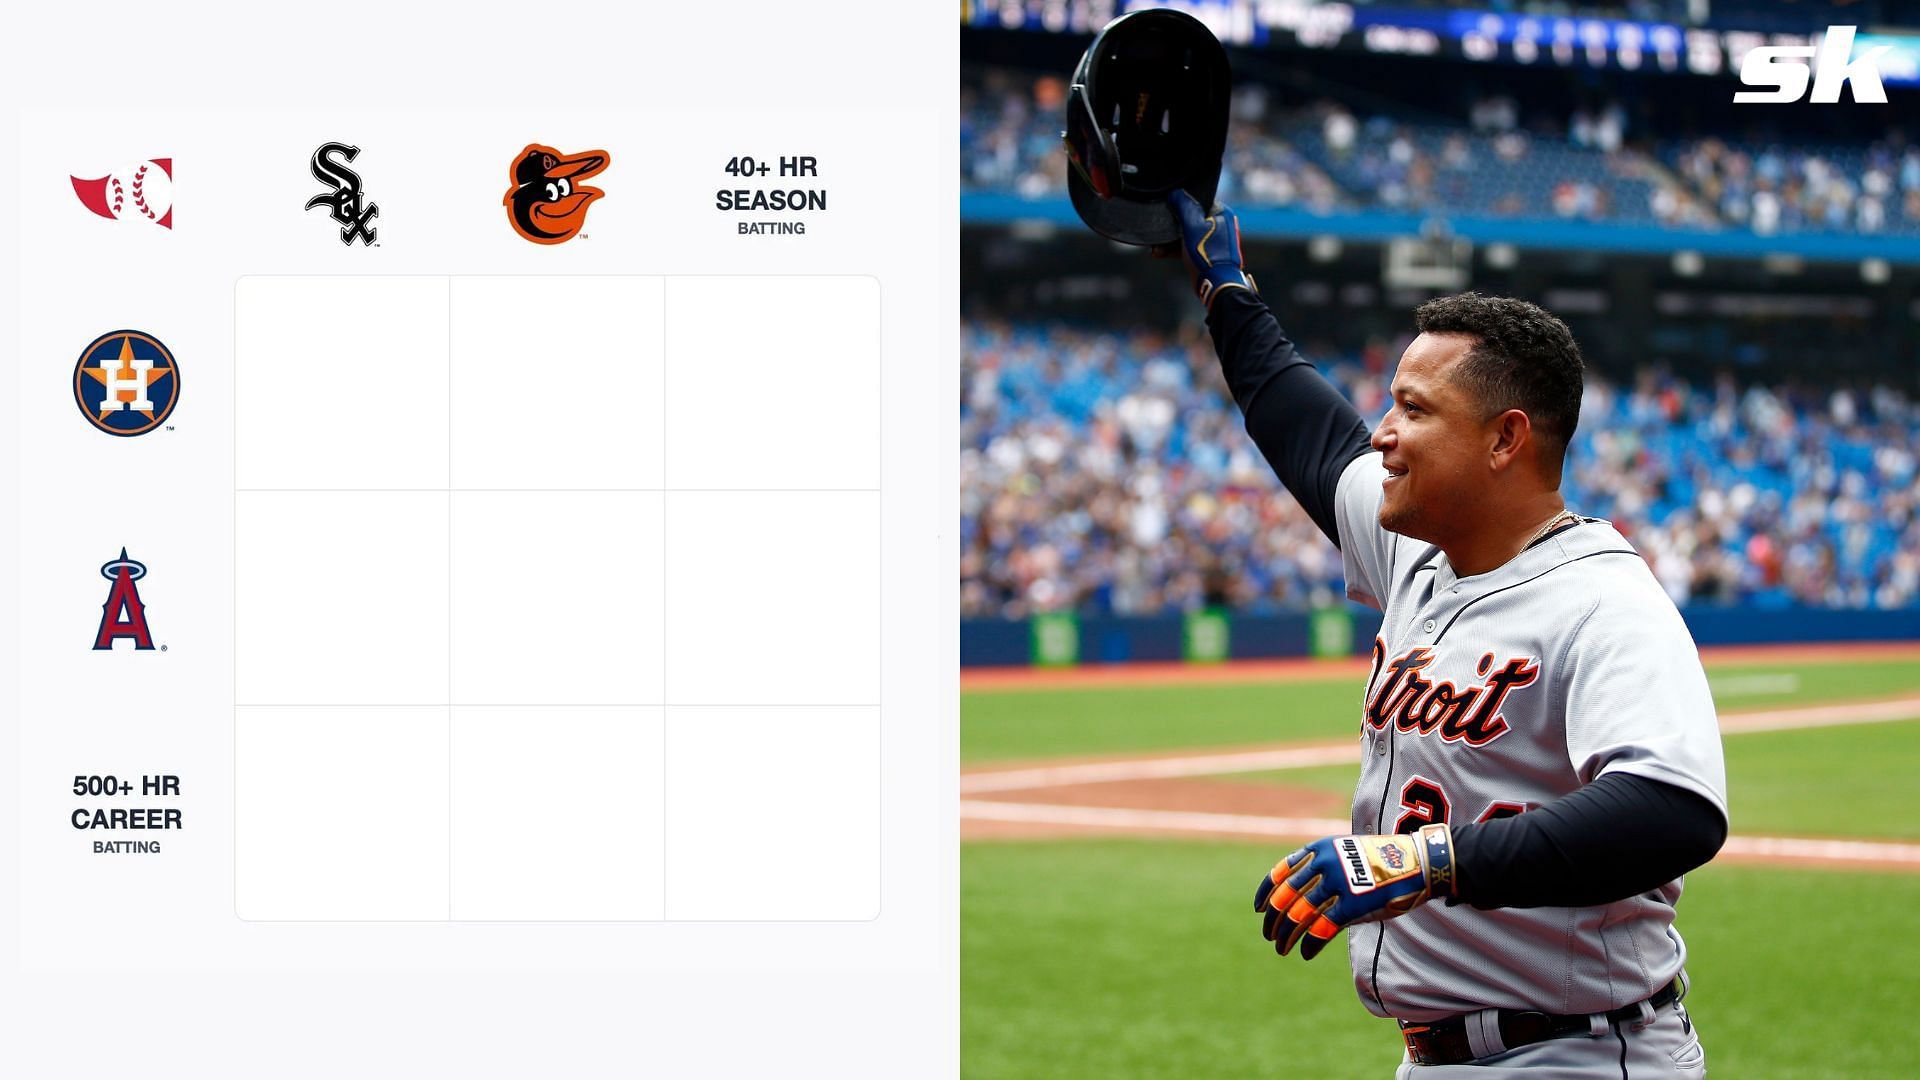 Miguel Cabrera at 500 HR: A Storied Career